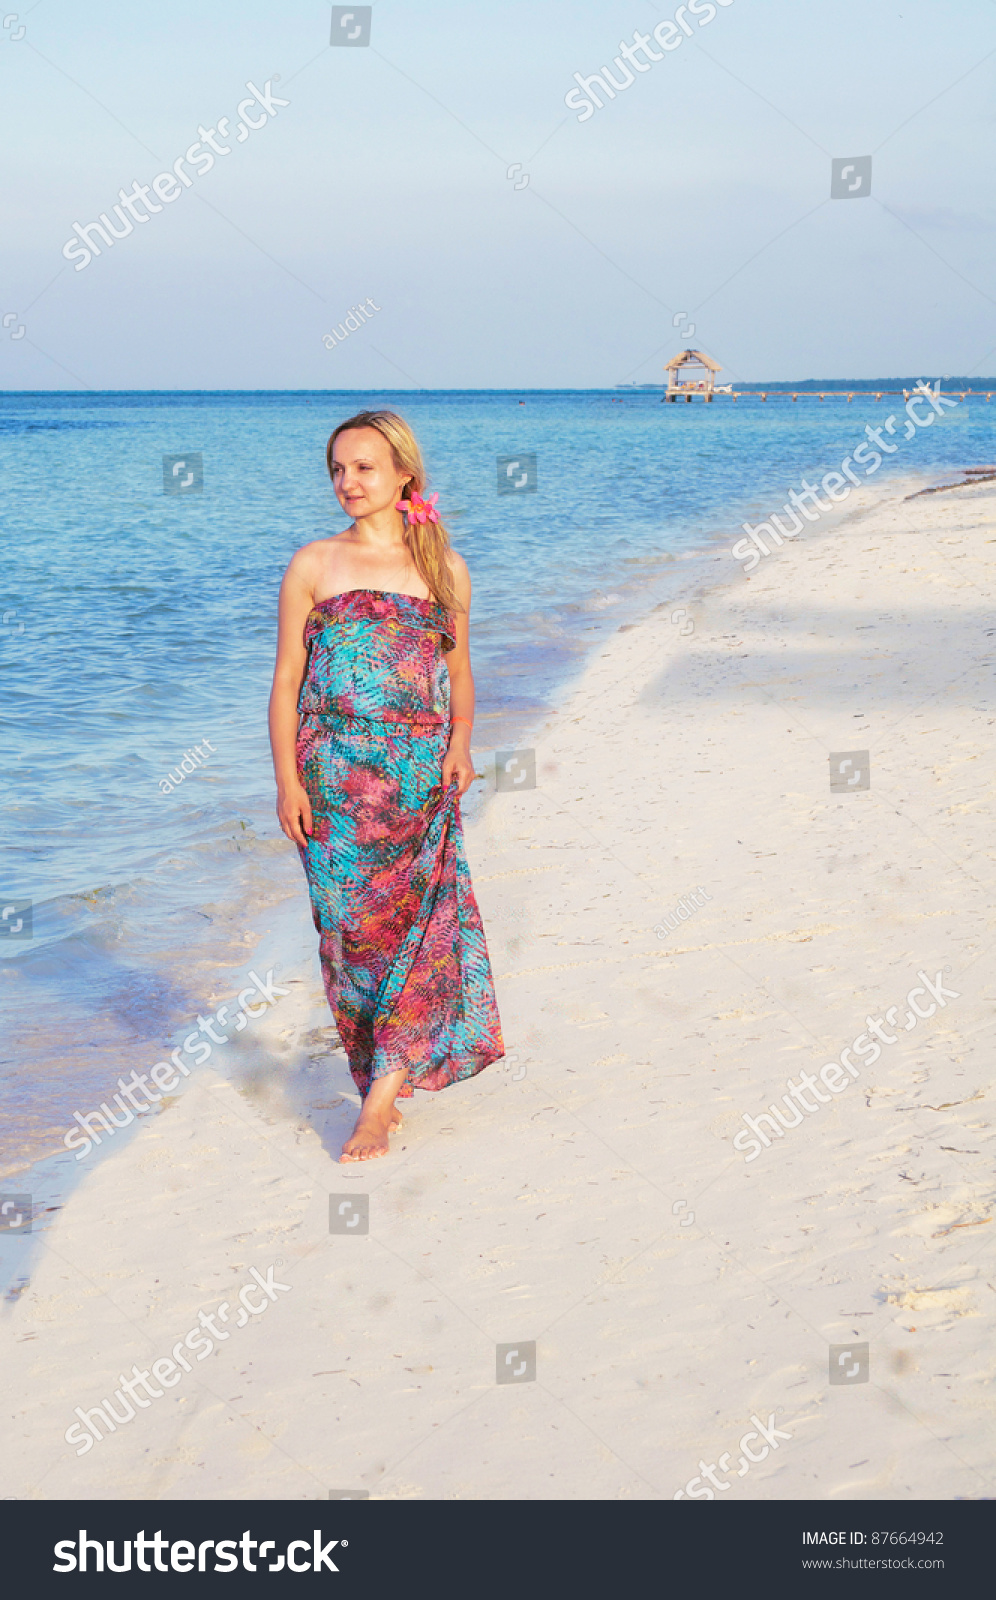 A Young Woman In Maxi Dress Is Walking Along The Beach Stock Photo ...